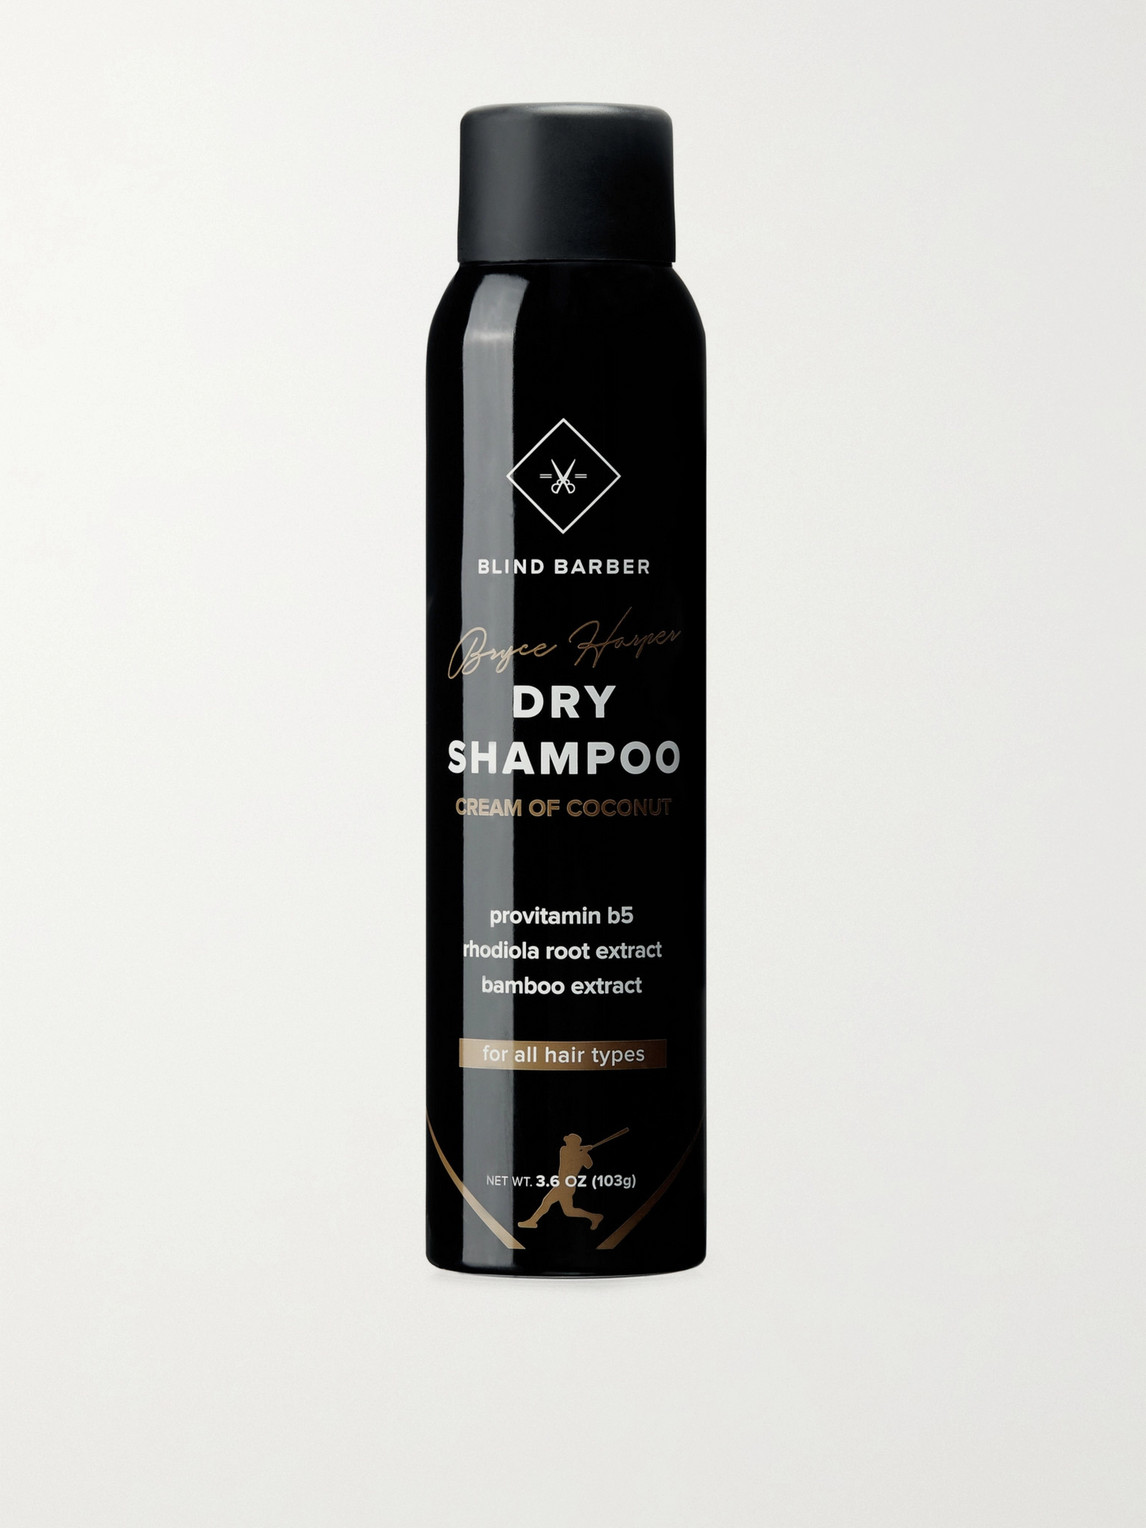 Blind Barber Bryce Harper Dry Shampoo, 103g In Colorless